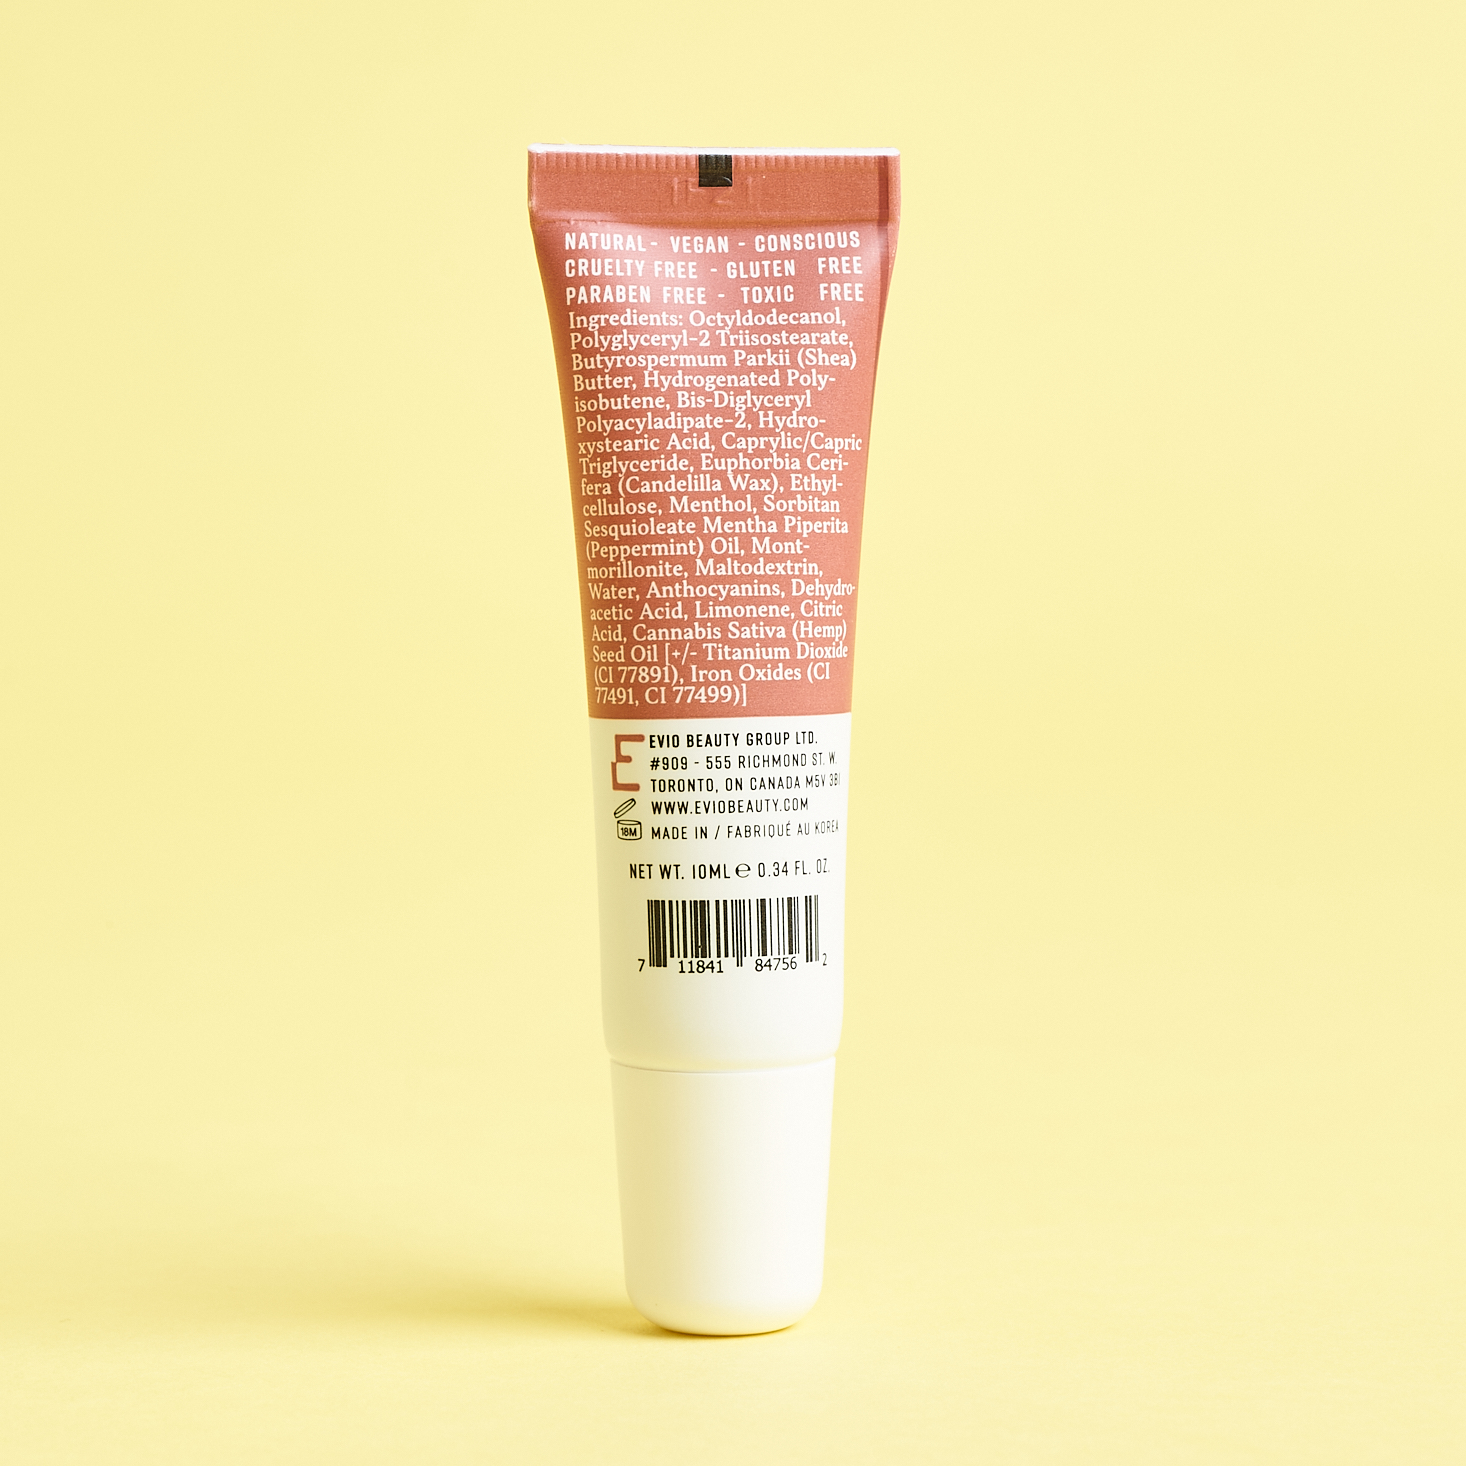 alternate view of pink and white lip balm tube